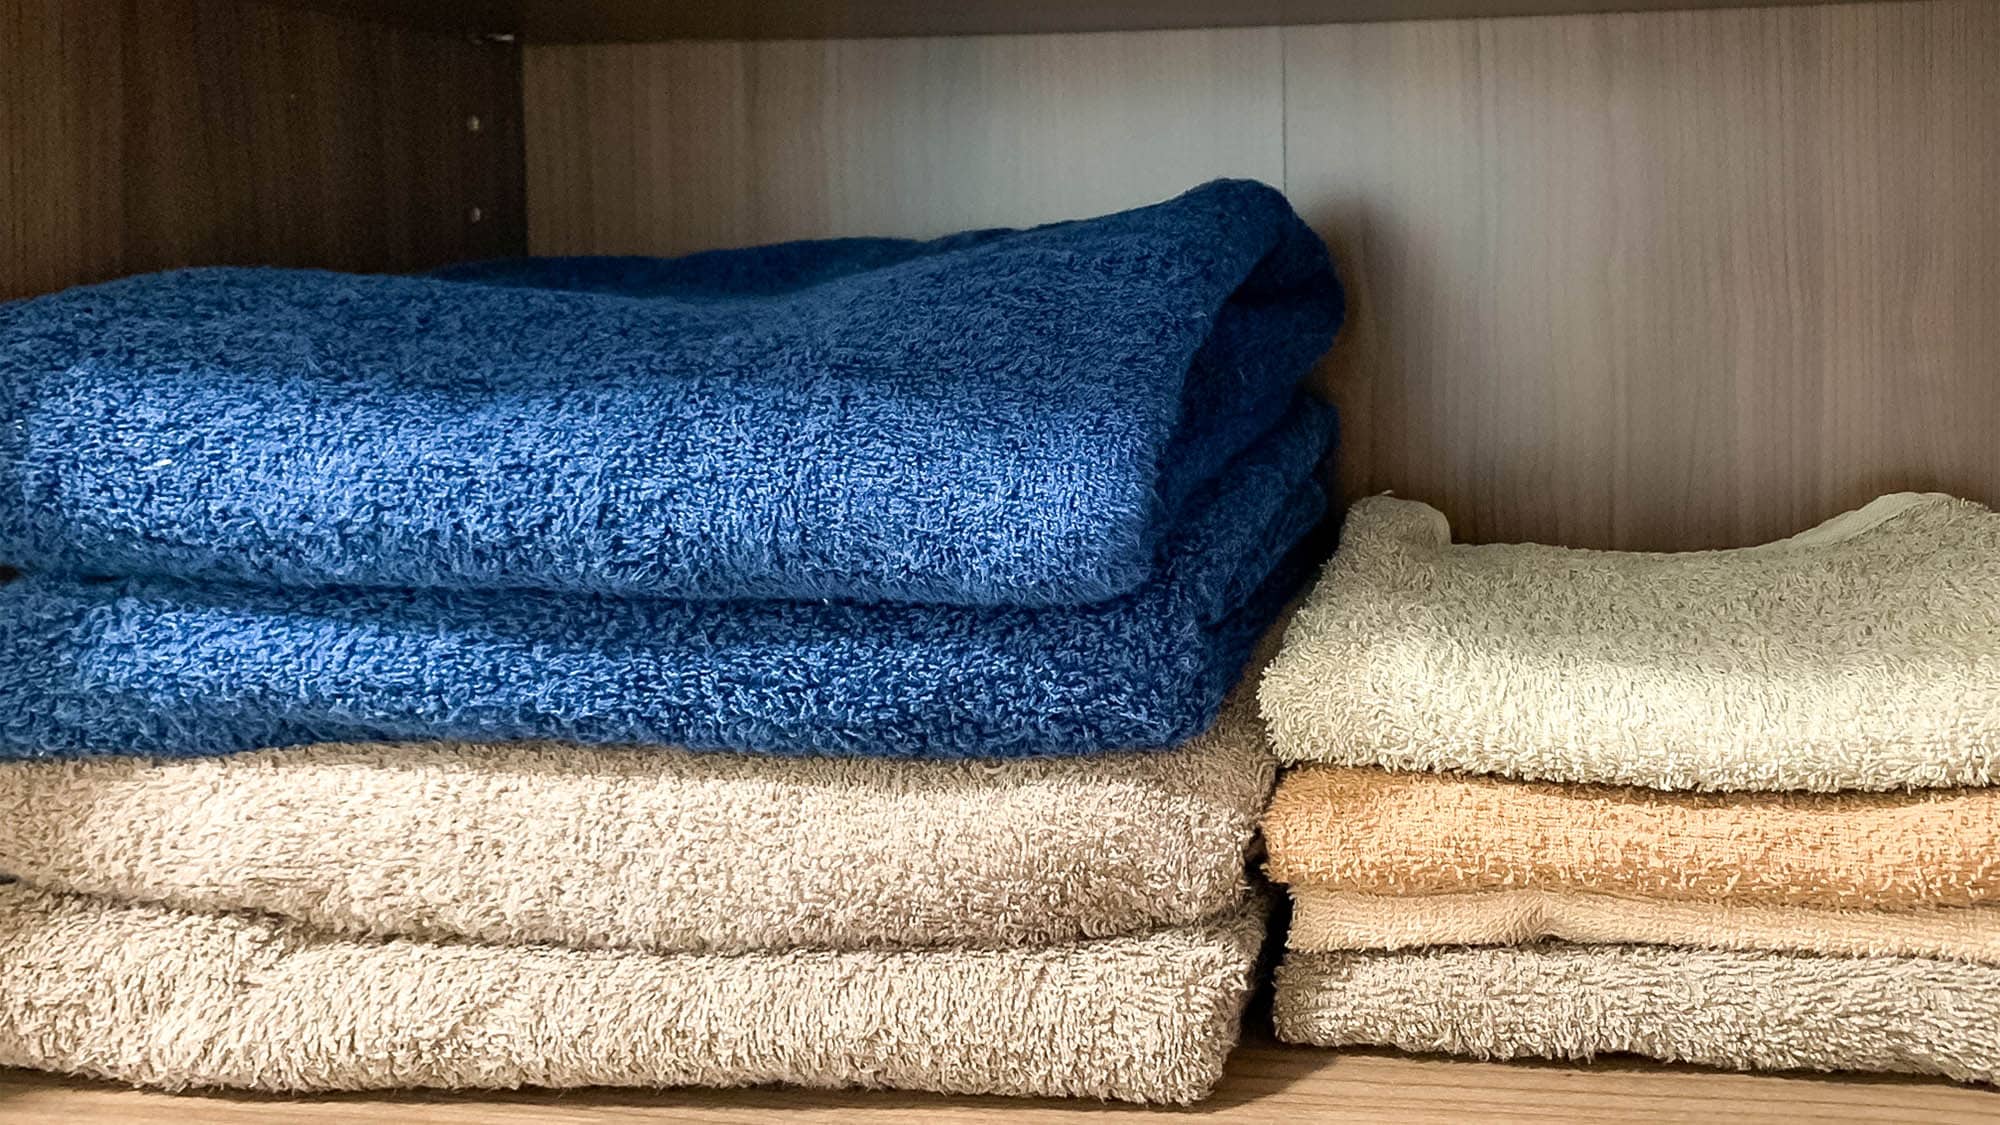 ・ Face towels and bath towels are available in each guest room.